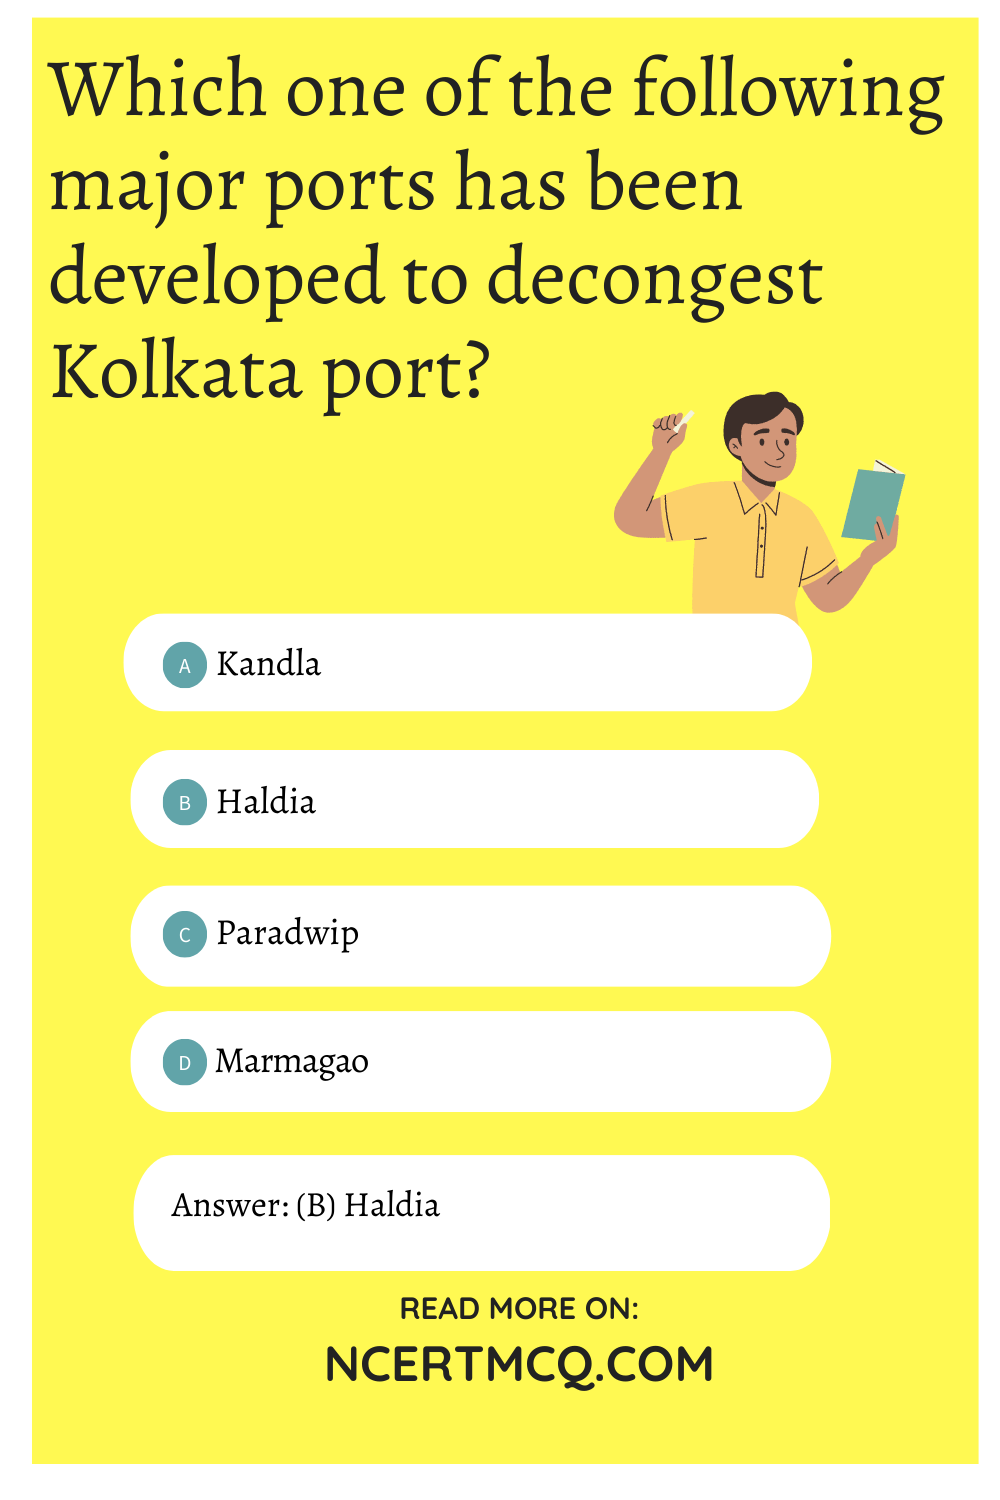 Which one of the following major ports has been developed to decongest Kolkata port?